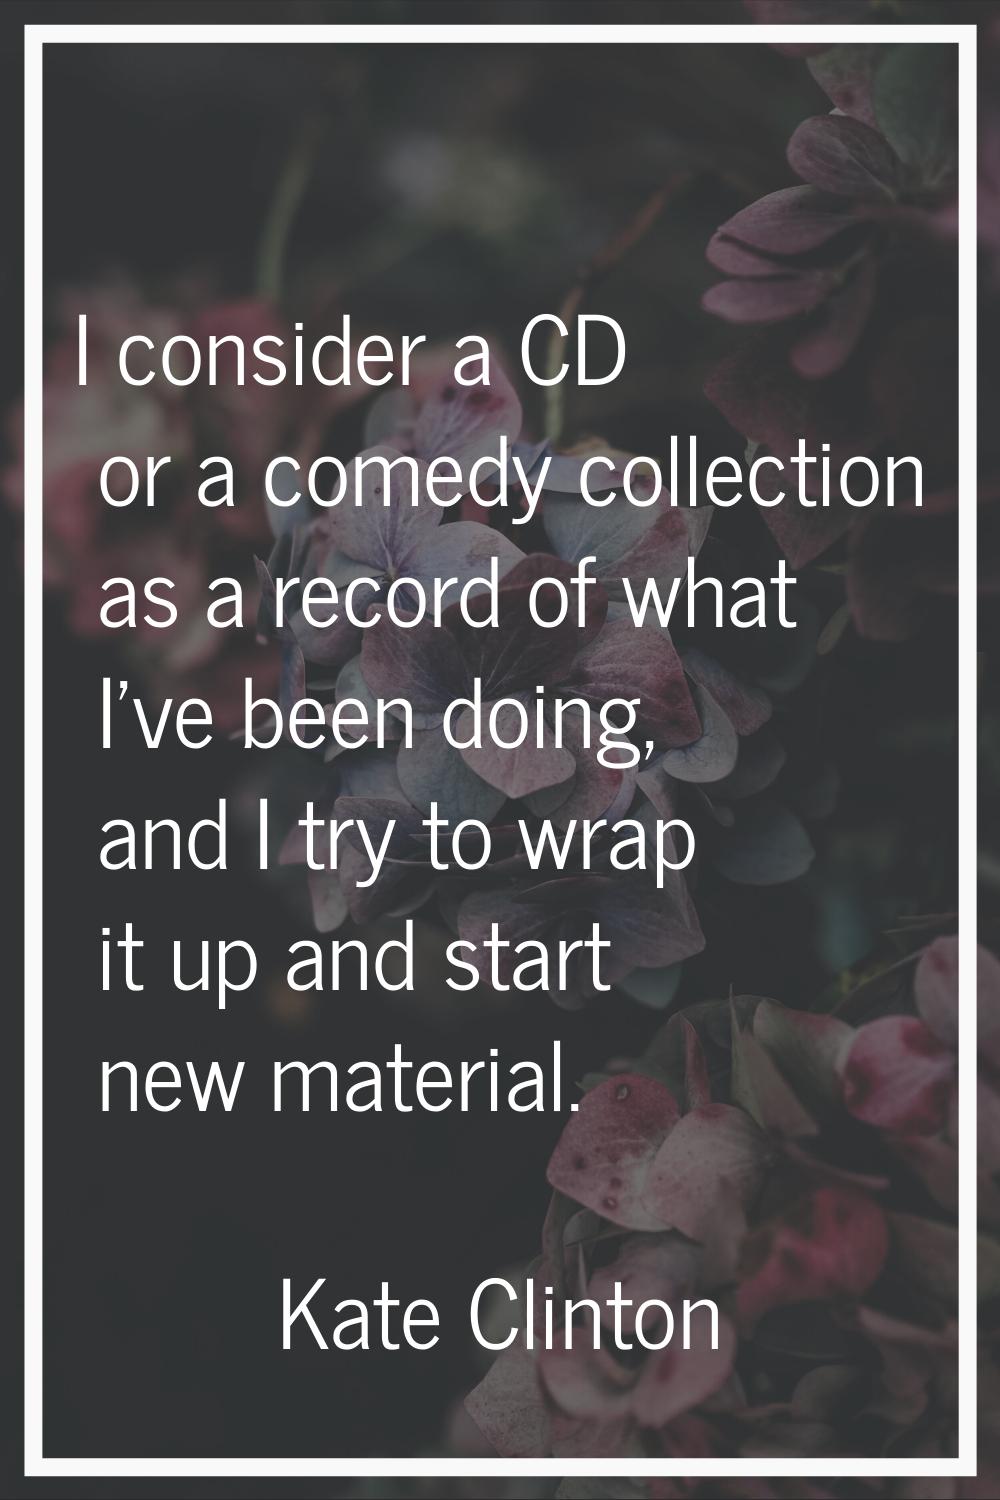 I consider a CD or a comedy collection as a record of what I've been doing, and I try to wrap it up